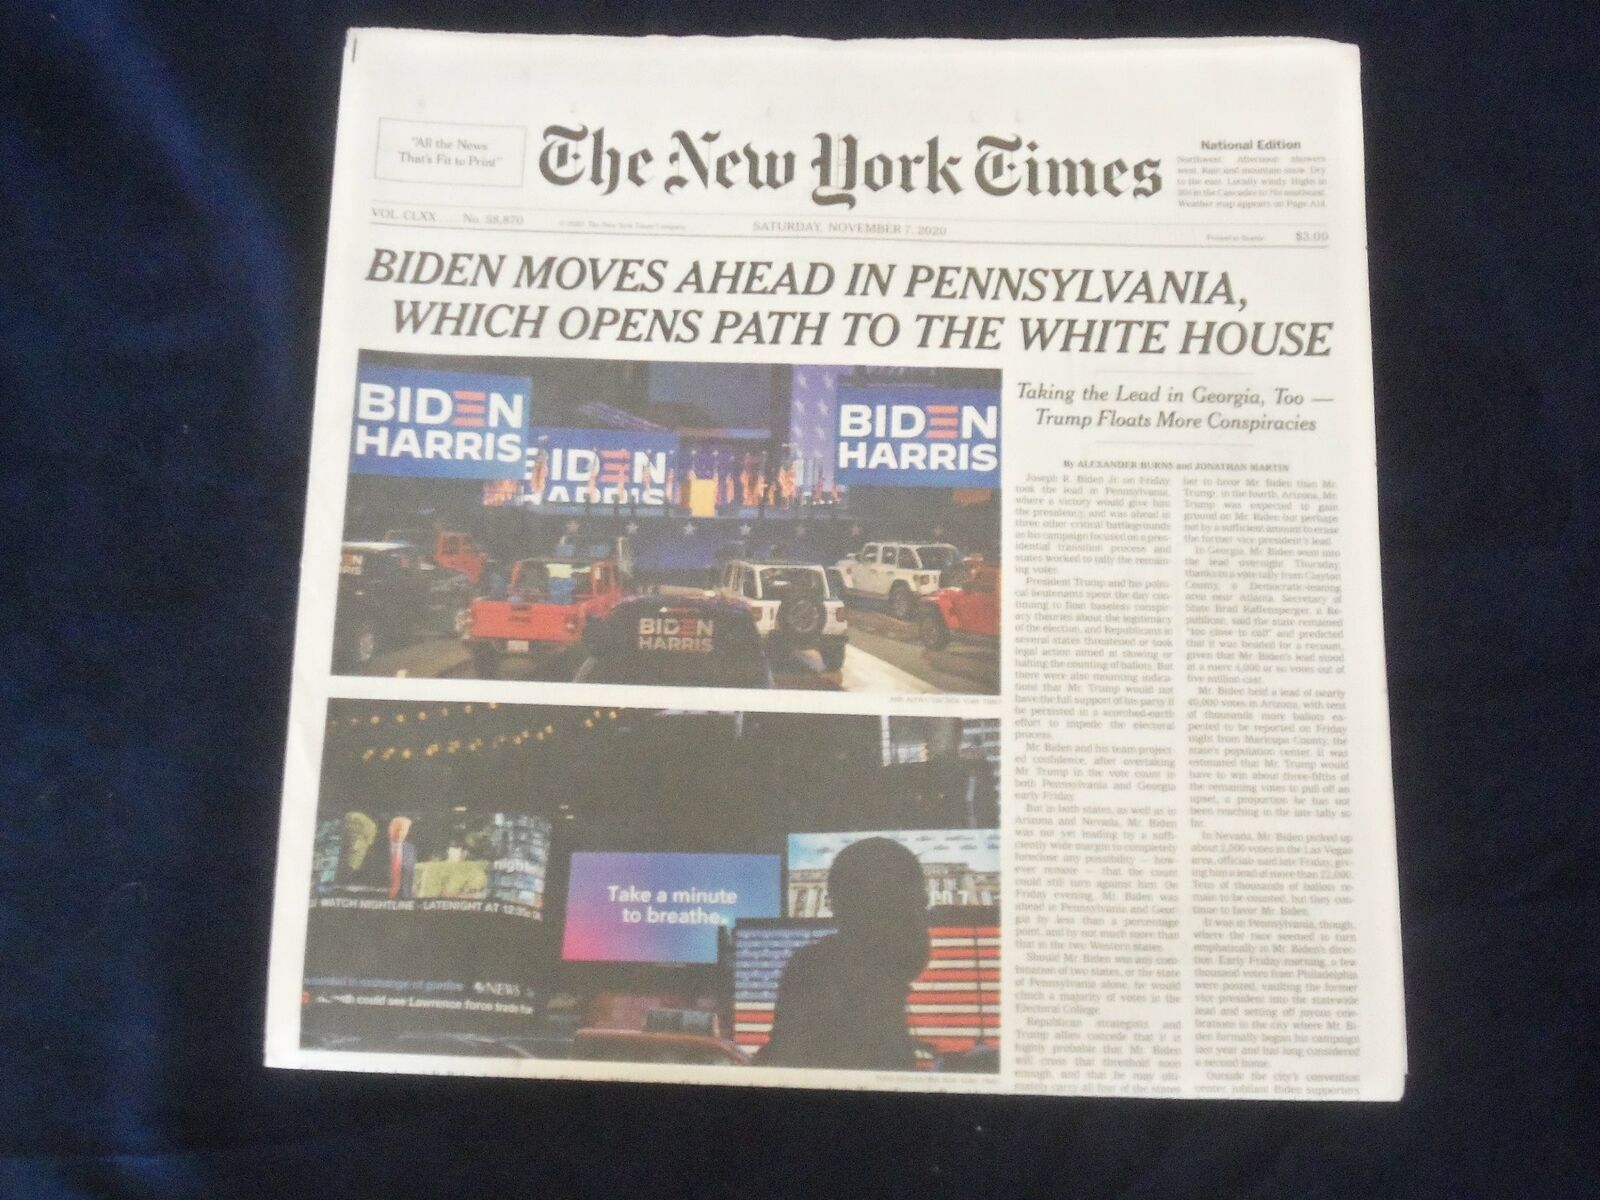 2020 NOV 7 NEW YORK TIMES-BIDEN MOVES AHEAD IN PA & GA OPENS PATH TO WHITE HOUSE